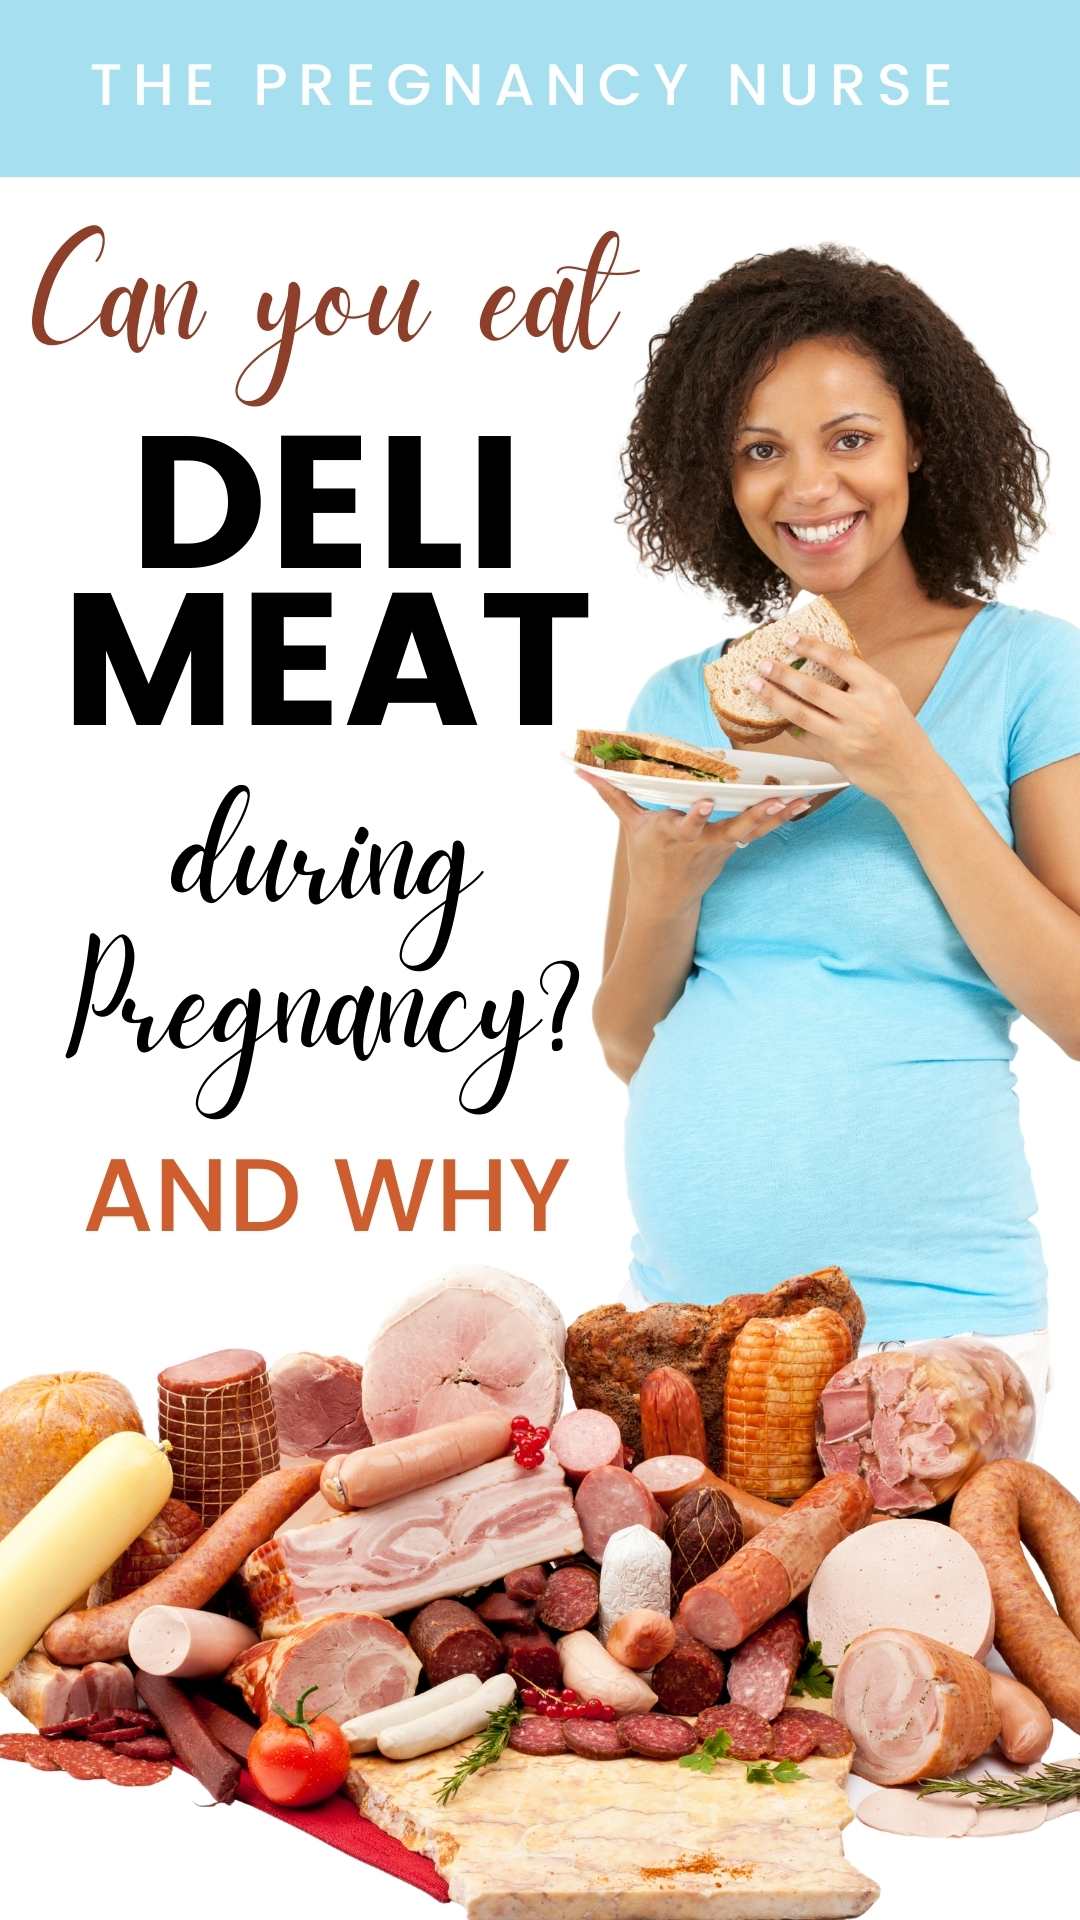 Deli meat can be complicated for pregnant women. And yes, that includes lunch meat and cold cuts. Pregnant women are advised to be mindful of meat during pregnancy, but why? Today we're going to chat about what the BEST practices are, and how you can make best choices for yourself.